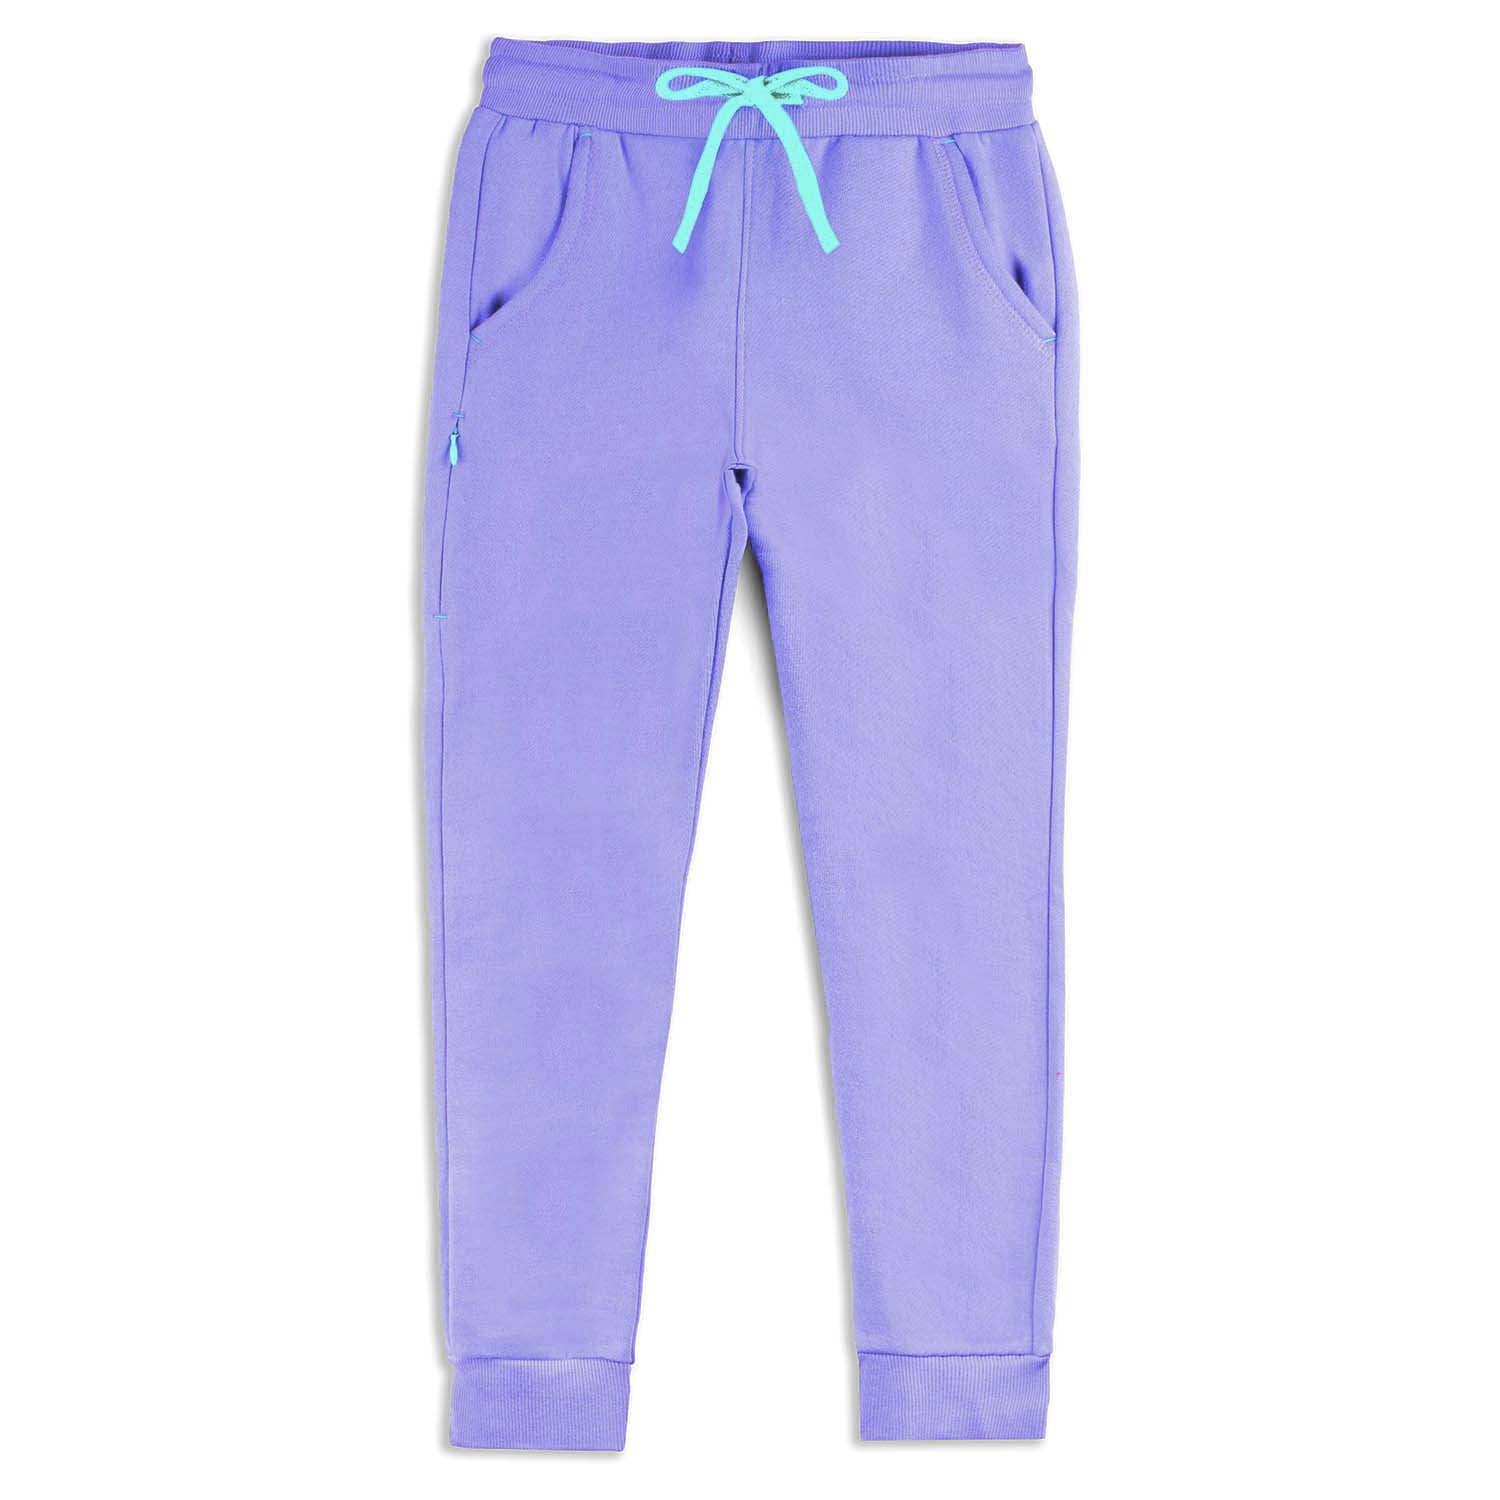 Affordable Wholesale nike joggers sweatpants For Trendsetting Looks 